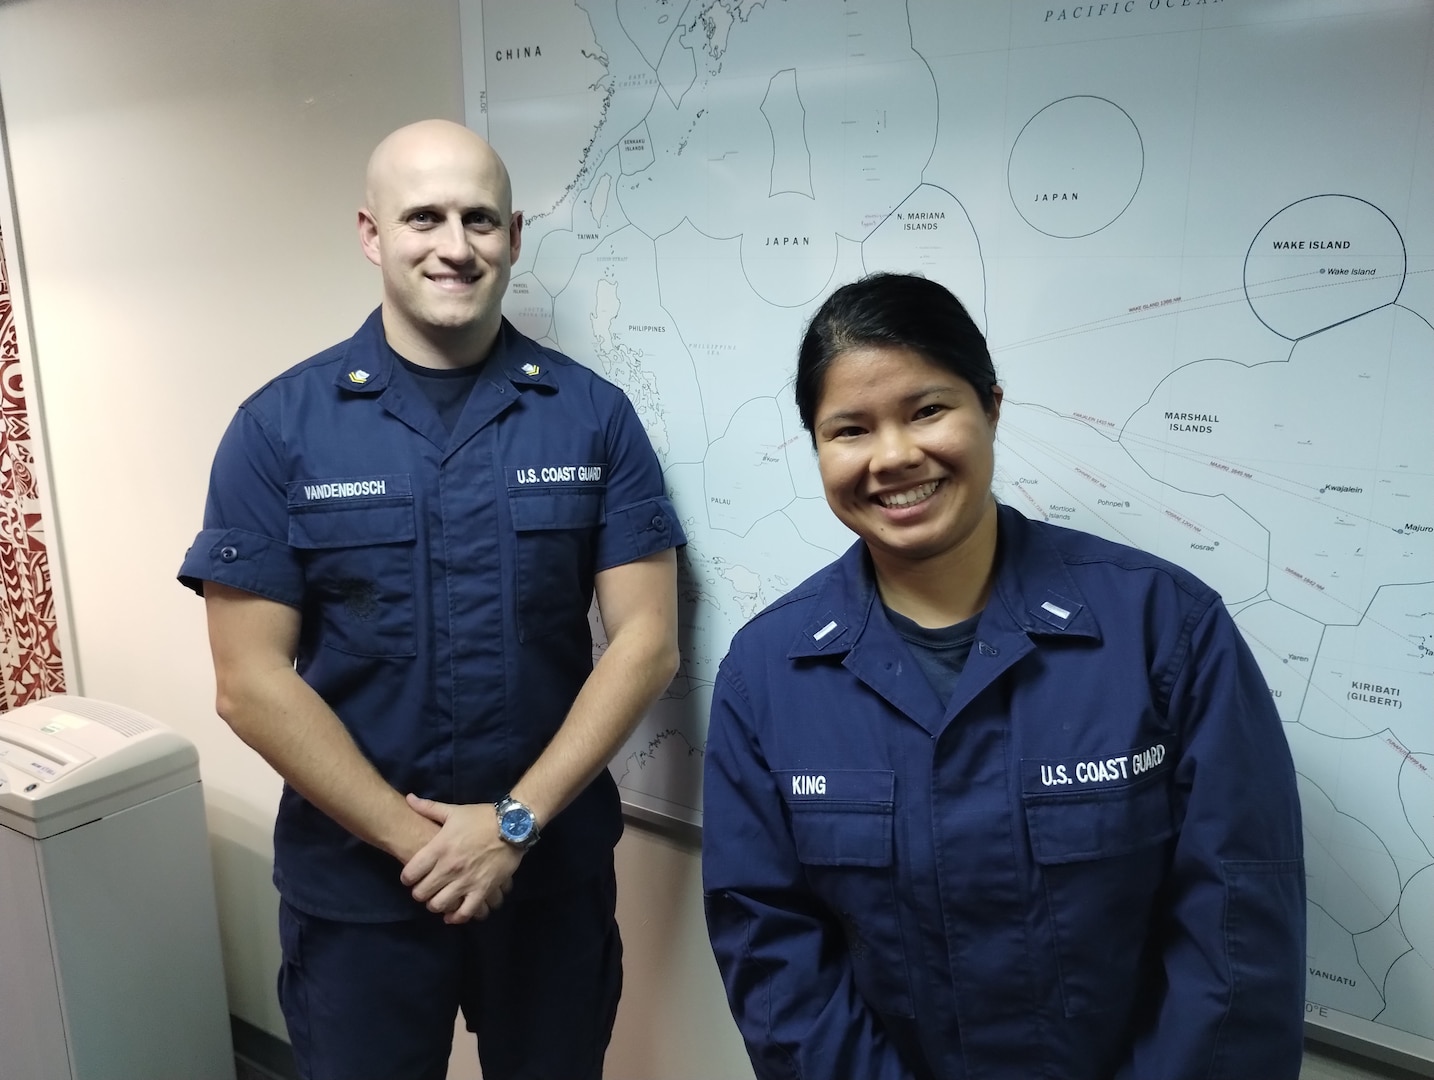 Lt. j.g. Deborah King and Petty Officer 2nd Class Paul Vandenbosch stand for a photo following the successful completion of a Joint Rescue Sub-Center a SAR communication exercise with the Maritime Rescue and Coordination Center (MRCC) in Japan on Jan. 31, 2024, simulating scenarios involving distressed vessels. The exercise, spanning an hour, enabled both parties to assess their strengths and identify areas for improvement. These exercises fortified international SAR collaboration and enhanced JRSC Guam's preparedness to facilitate effective rescue operations across its 1.9 million square mile jurisdiction—the largest SAR responsibility zone of any U.S. Coast Guard sector. (U.S. Coast Guard photo)